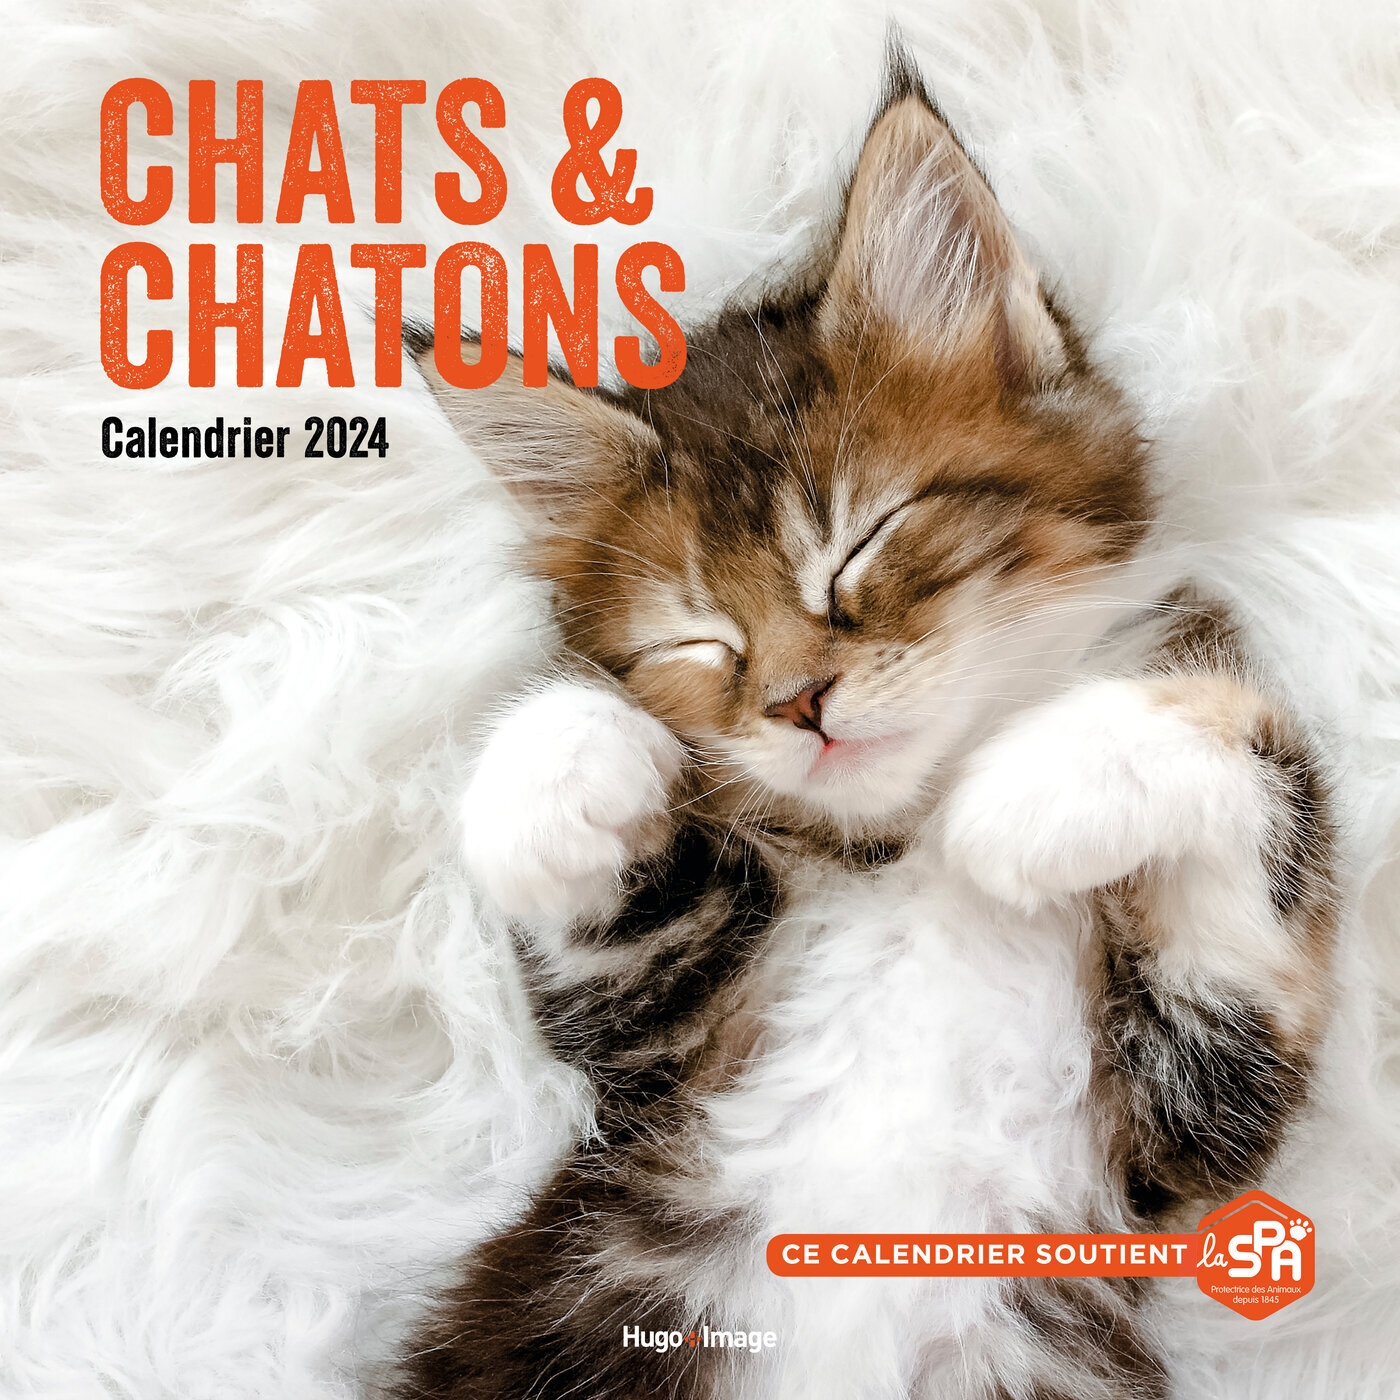 Calendrier mural chats et chatons 2024 Hugo Publishing